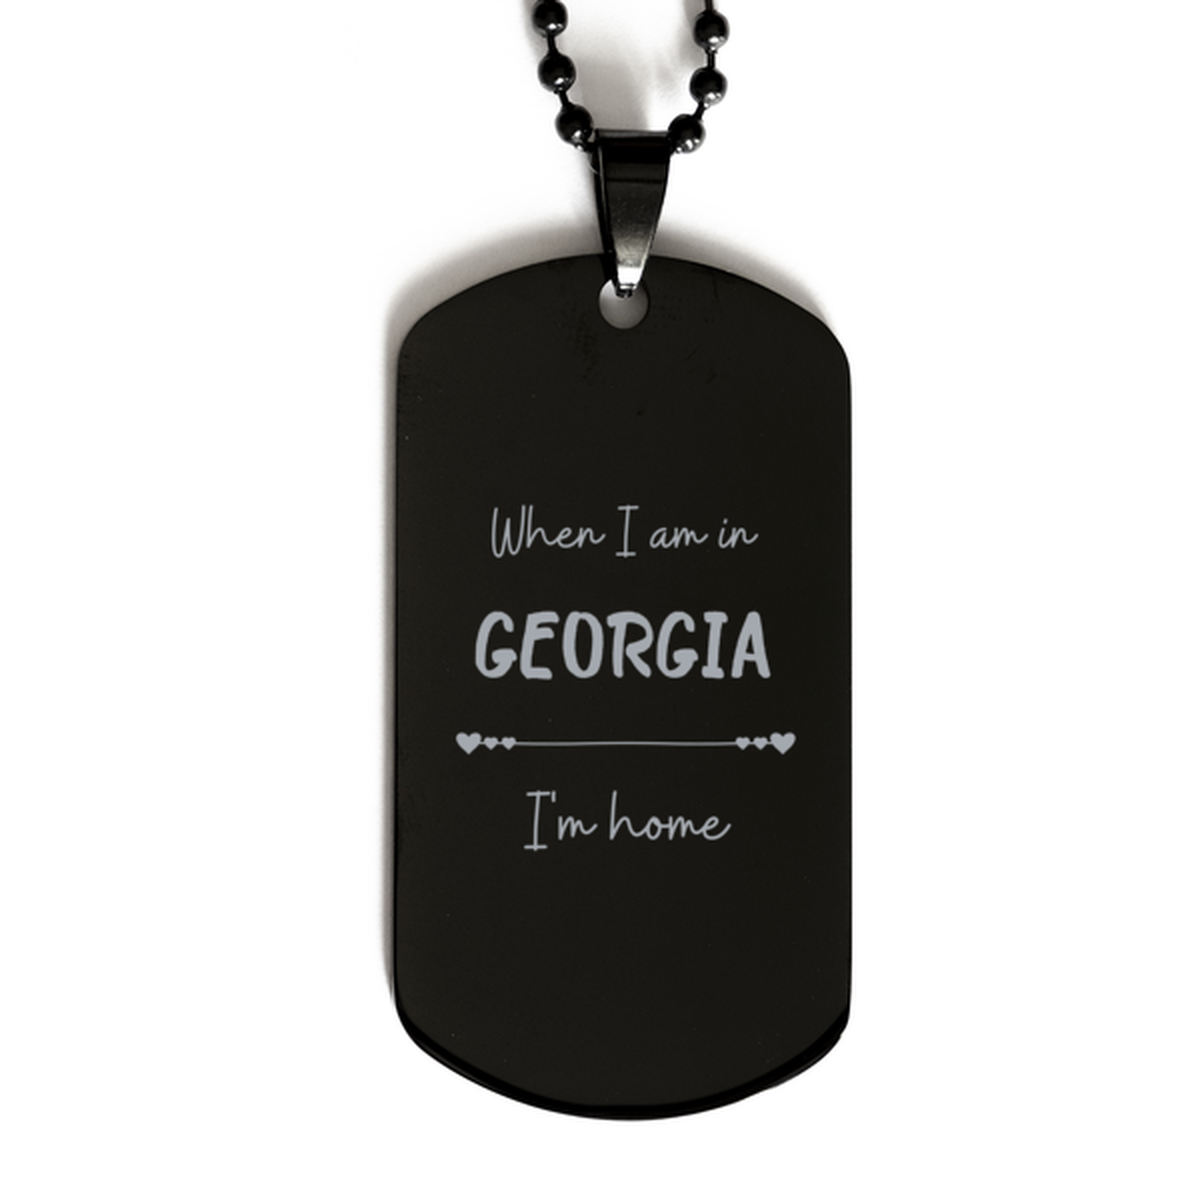 When I am in Georgia I'm home Black Dog Tag, Cheap Gifts For Georgia, State Georgia Birthday Gifts for Friends Coworker